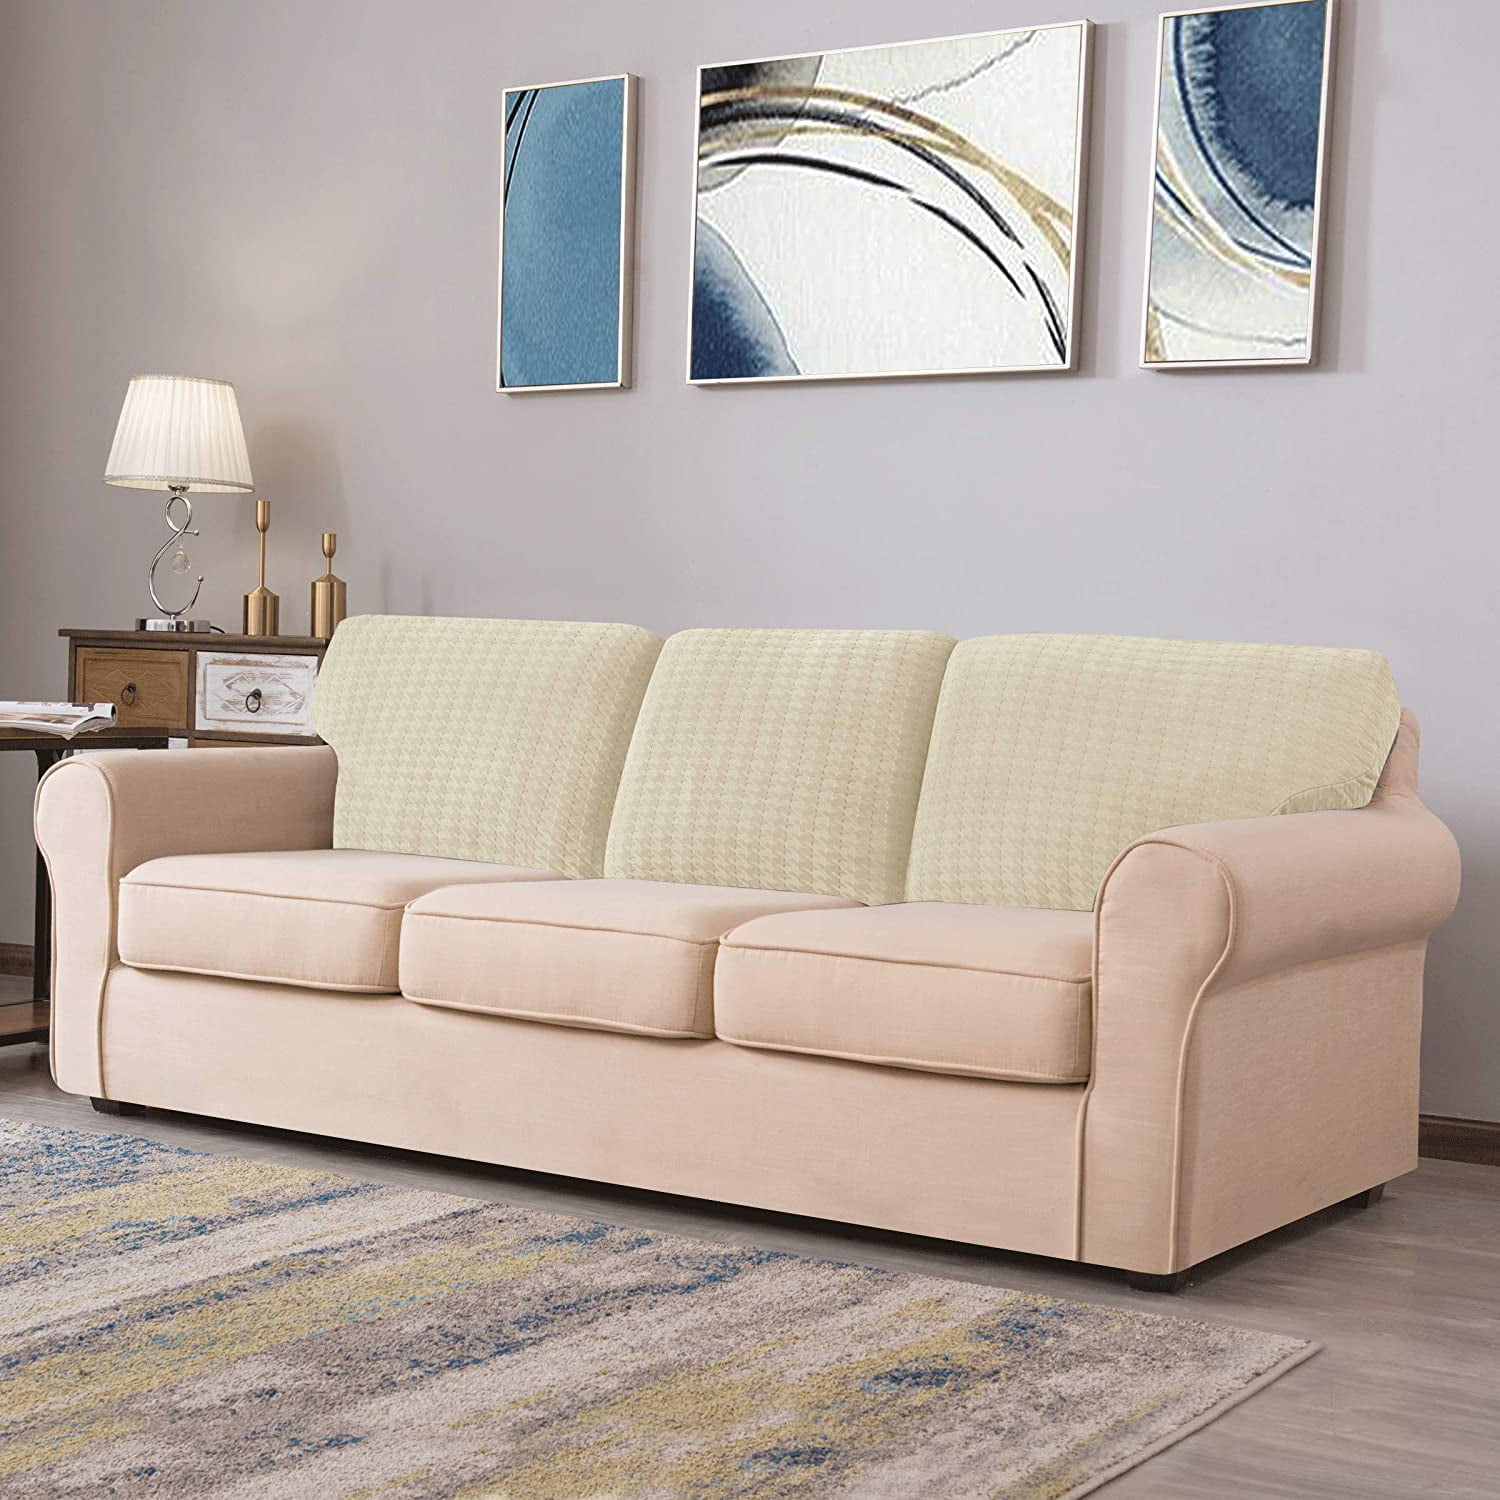 Details about   Chun Yi Stretch Couch Cushion Cover Diamond Lattice Seat Slipcover Suitable For 